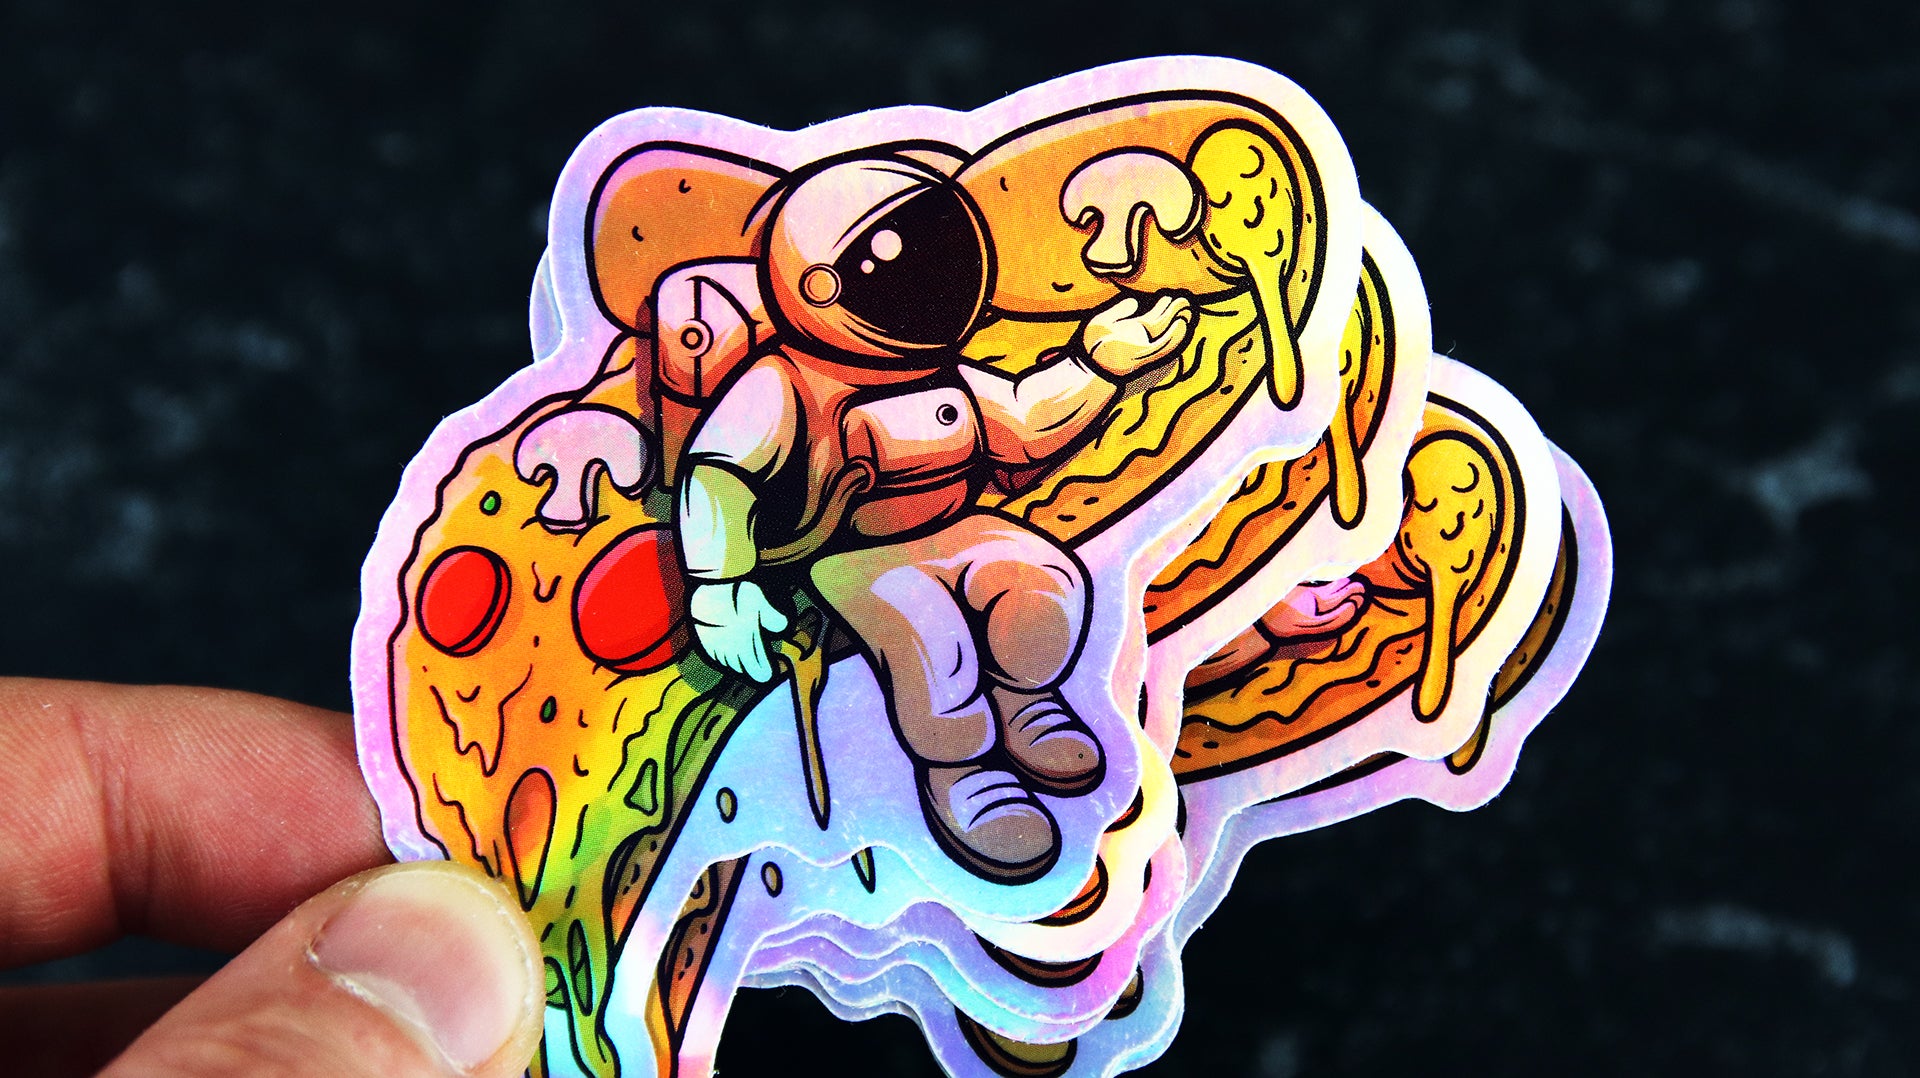 Holographic Stickers - Free US Delivery